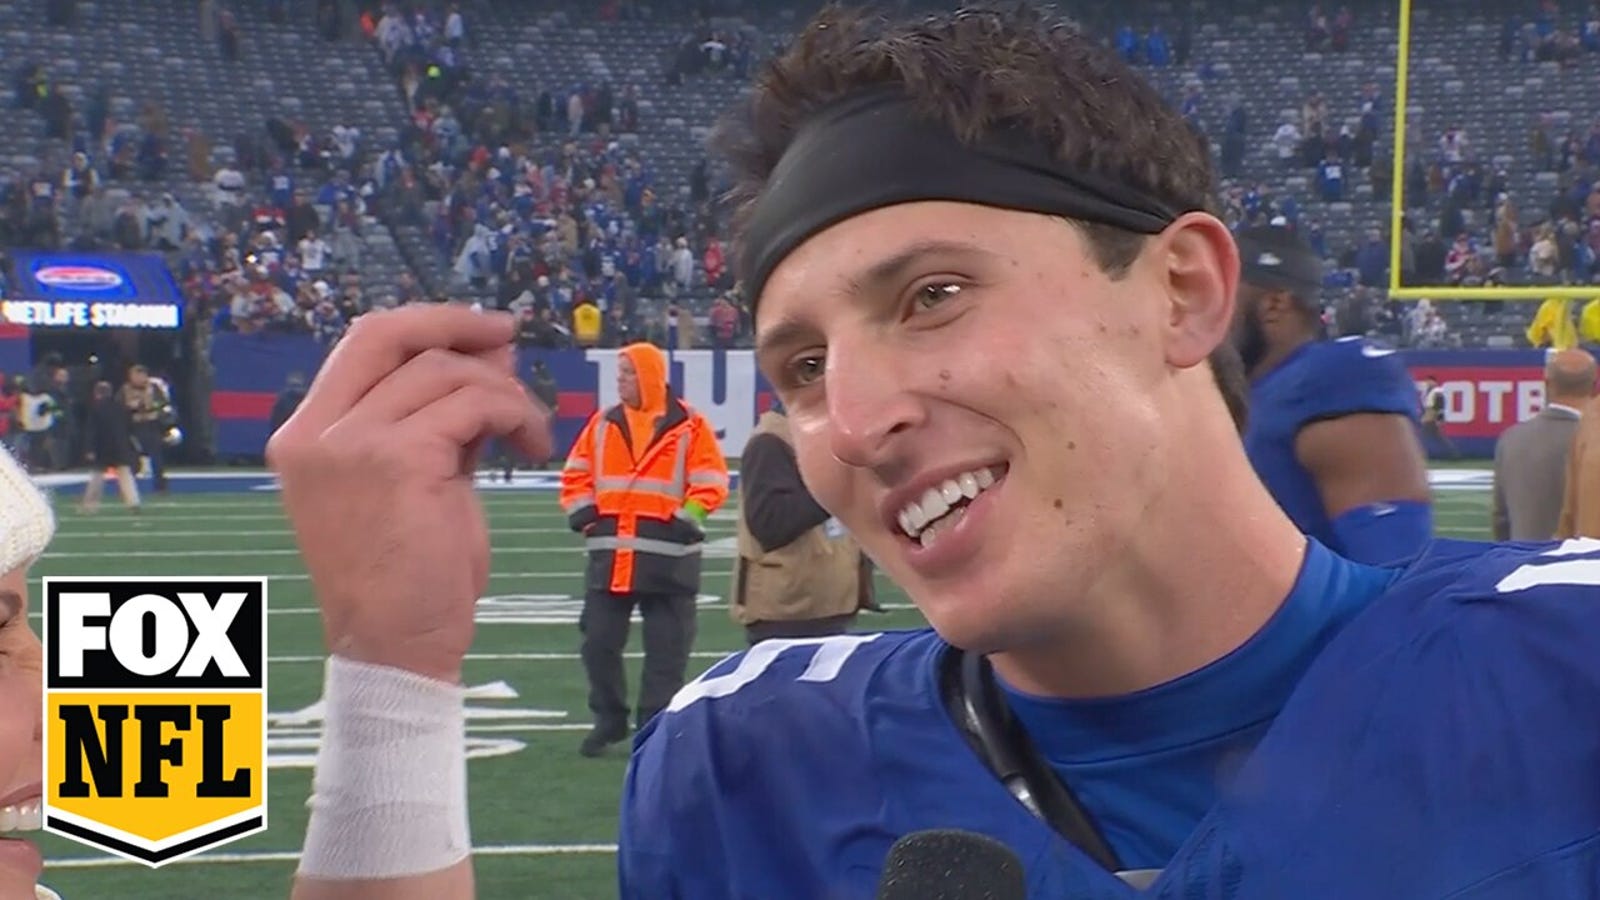 'That's all that matters is that W' - Giants' QB Tommy Devito after win vs. Patriots